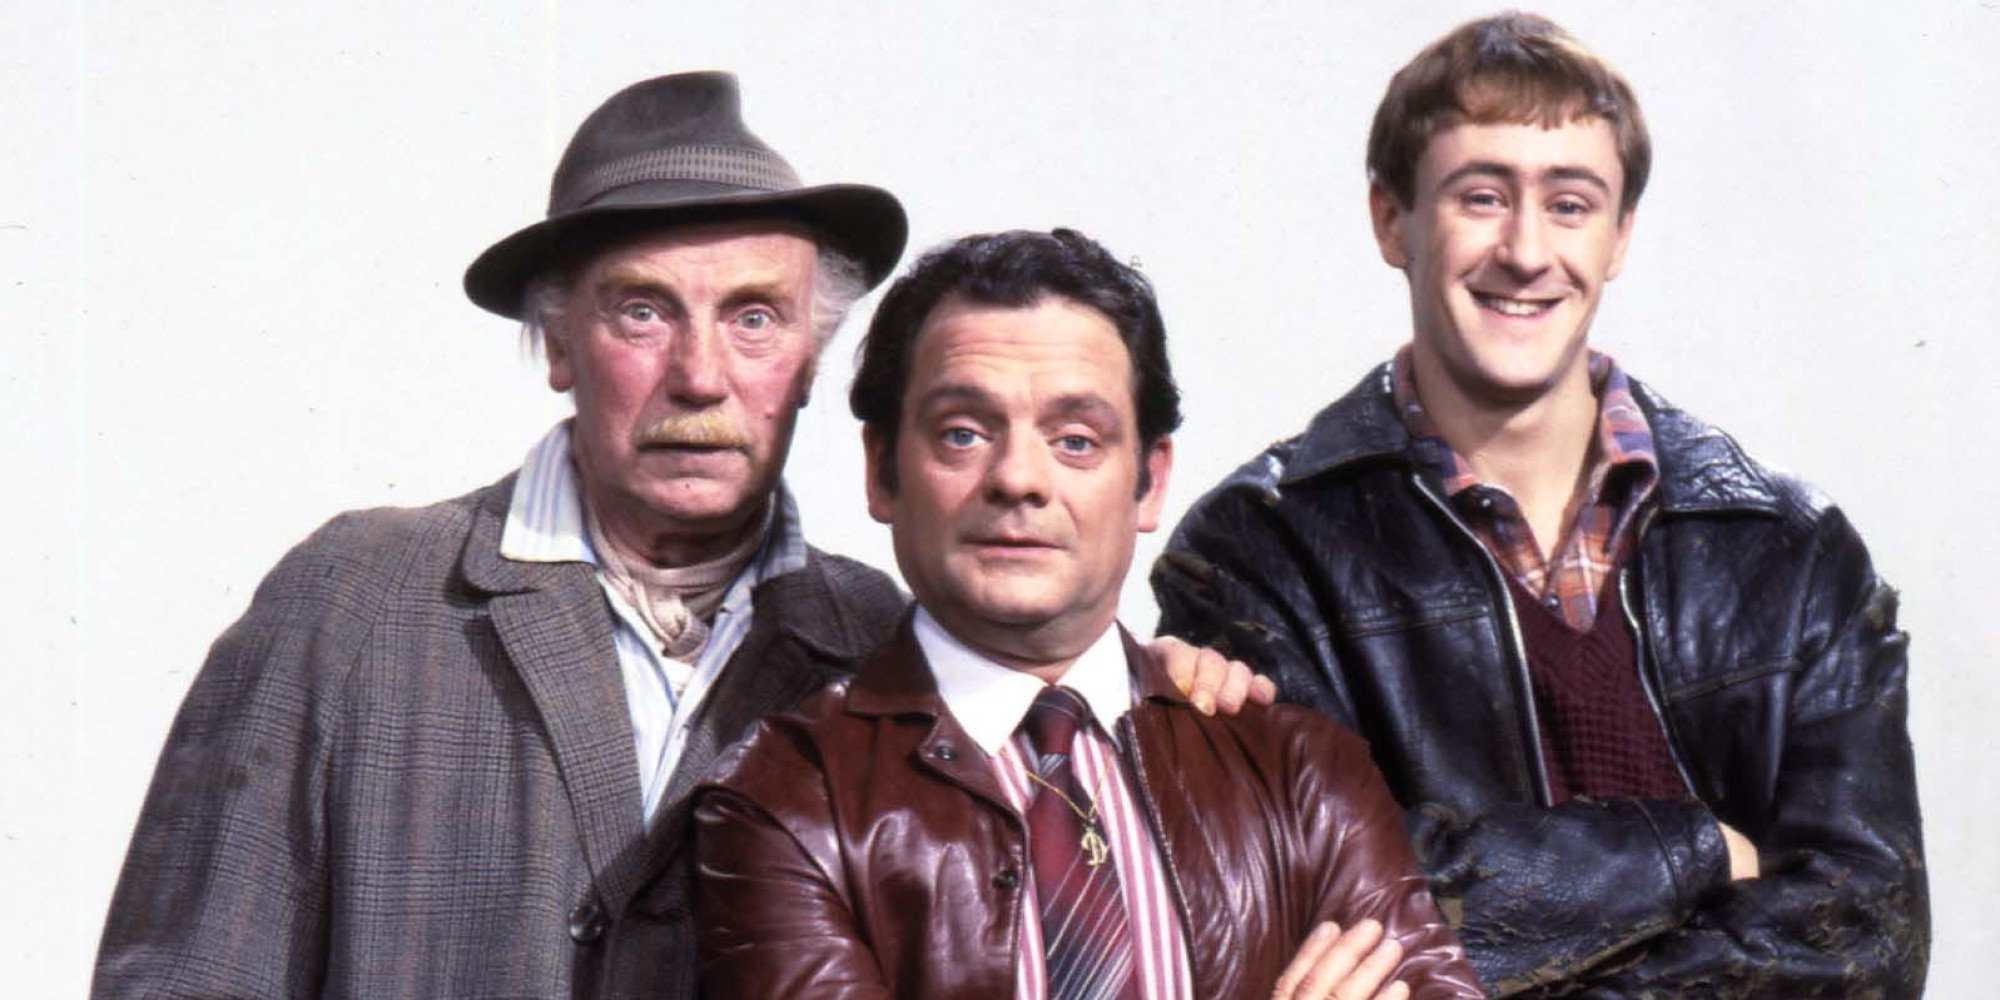 Only-Fools-and-Horses-4.jpg